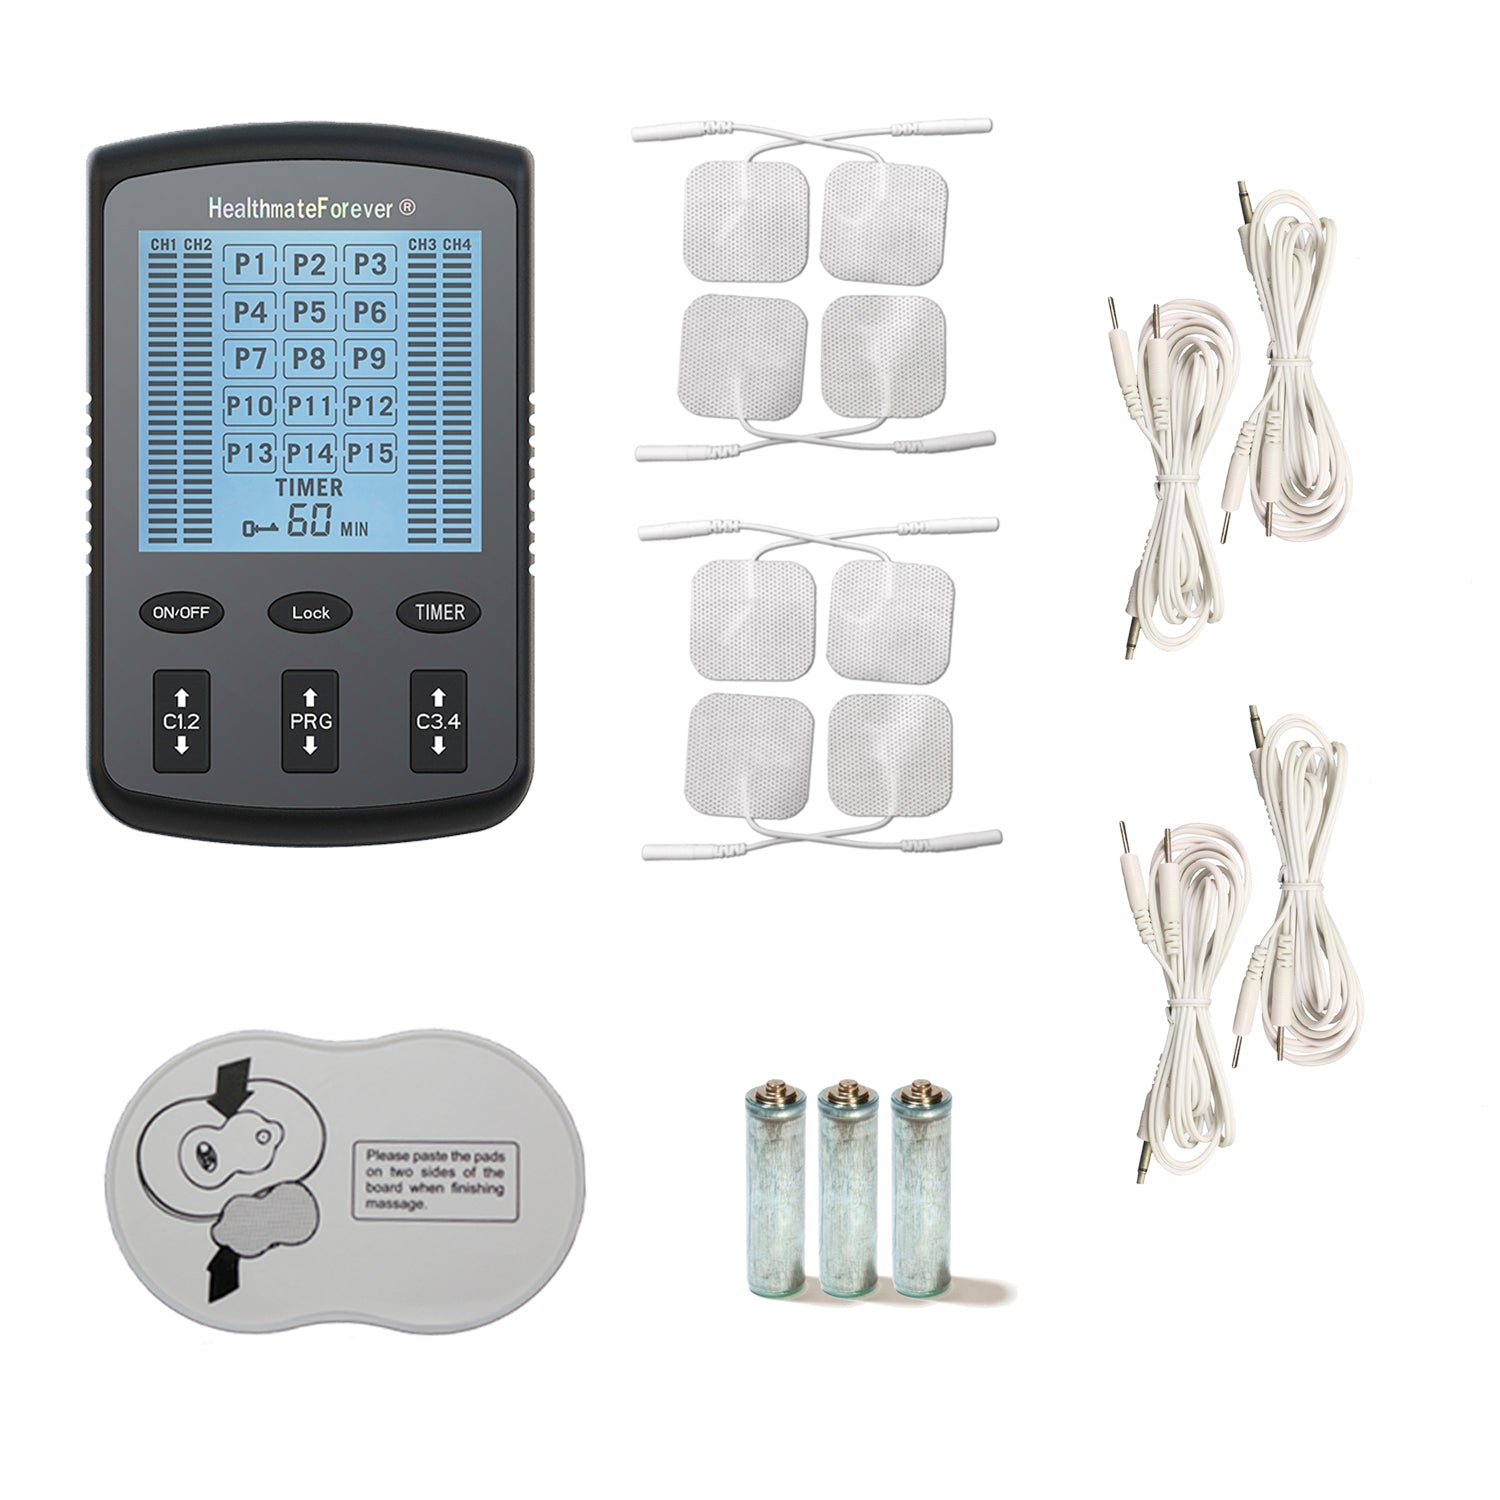 2019 Version ZT15AB Powerful Electrotherapy Pain Relief TENS UNIT - HealthmateForever.com